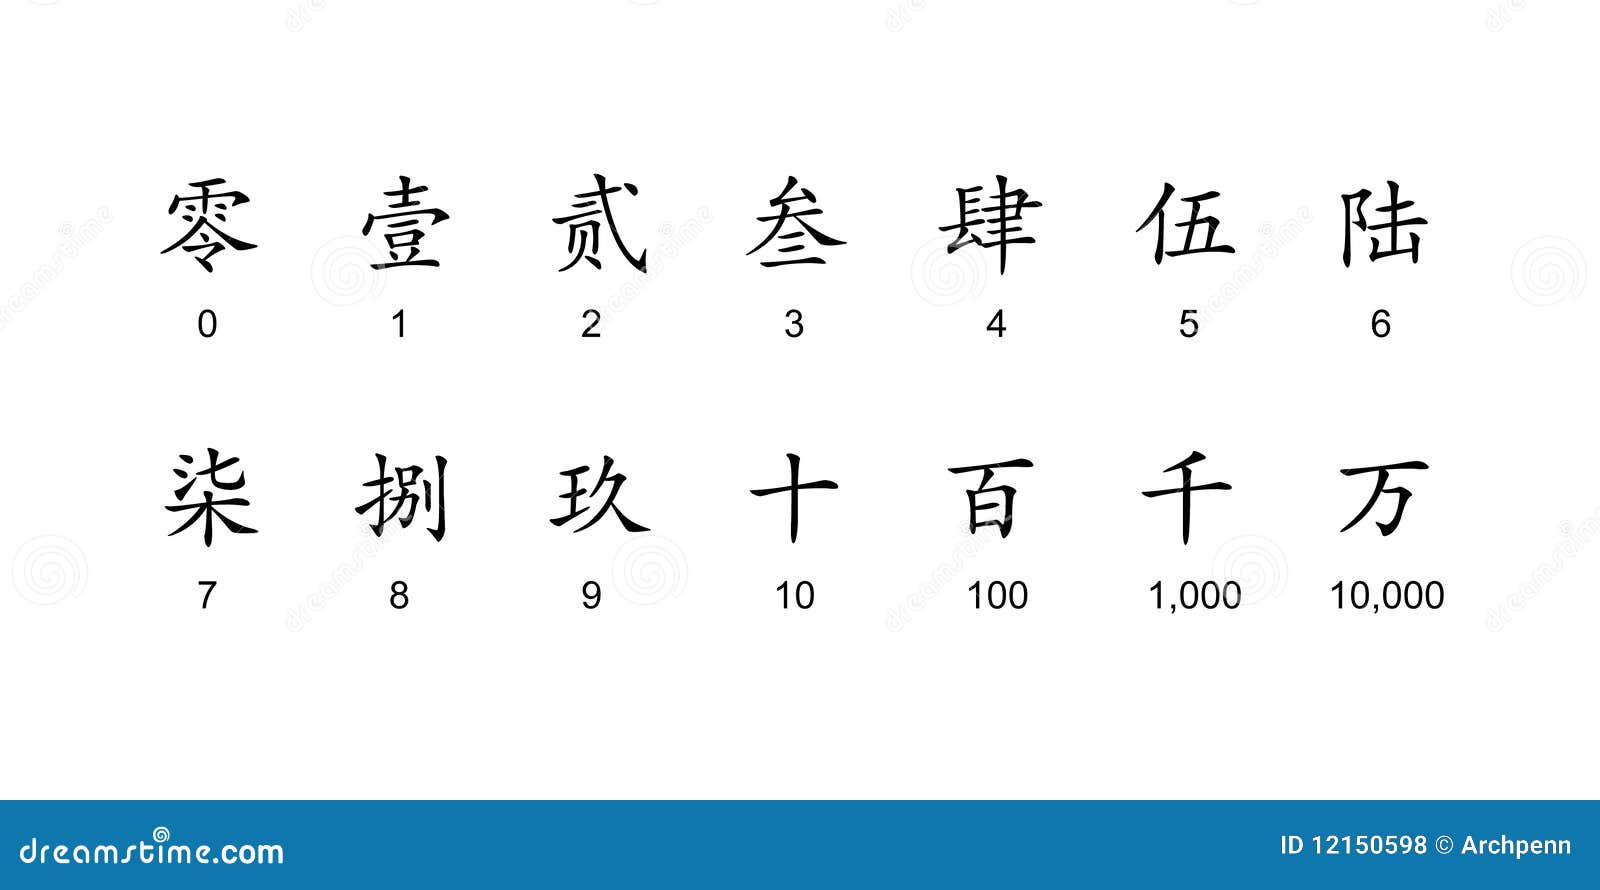 chinese-formal-number-character-royalty-free-stock-photos-image-12150598